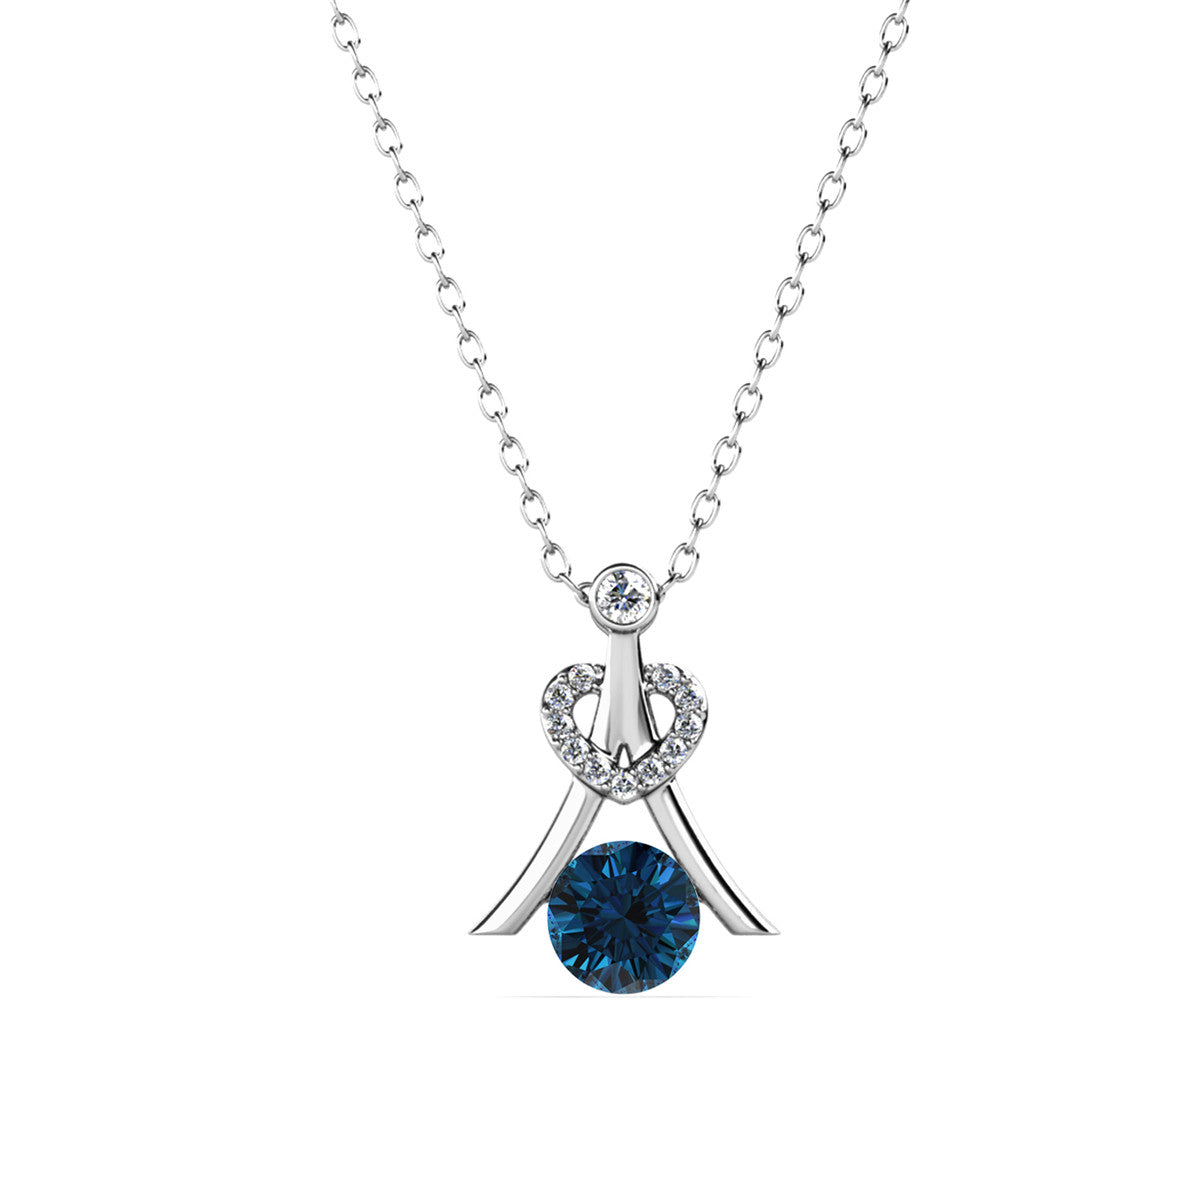 Serenity December Birthstone Blue Topaz Necklace, 18k White Gold Plated Silver Necklace with Round Cut Crystals